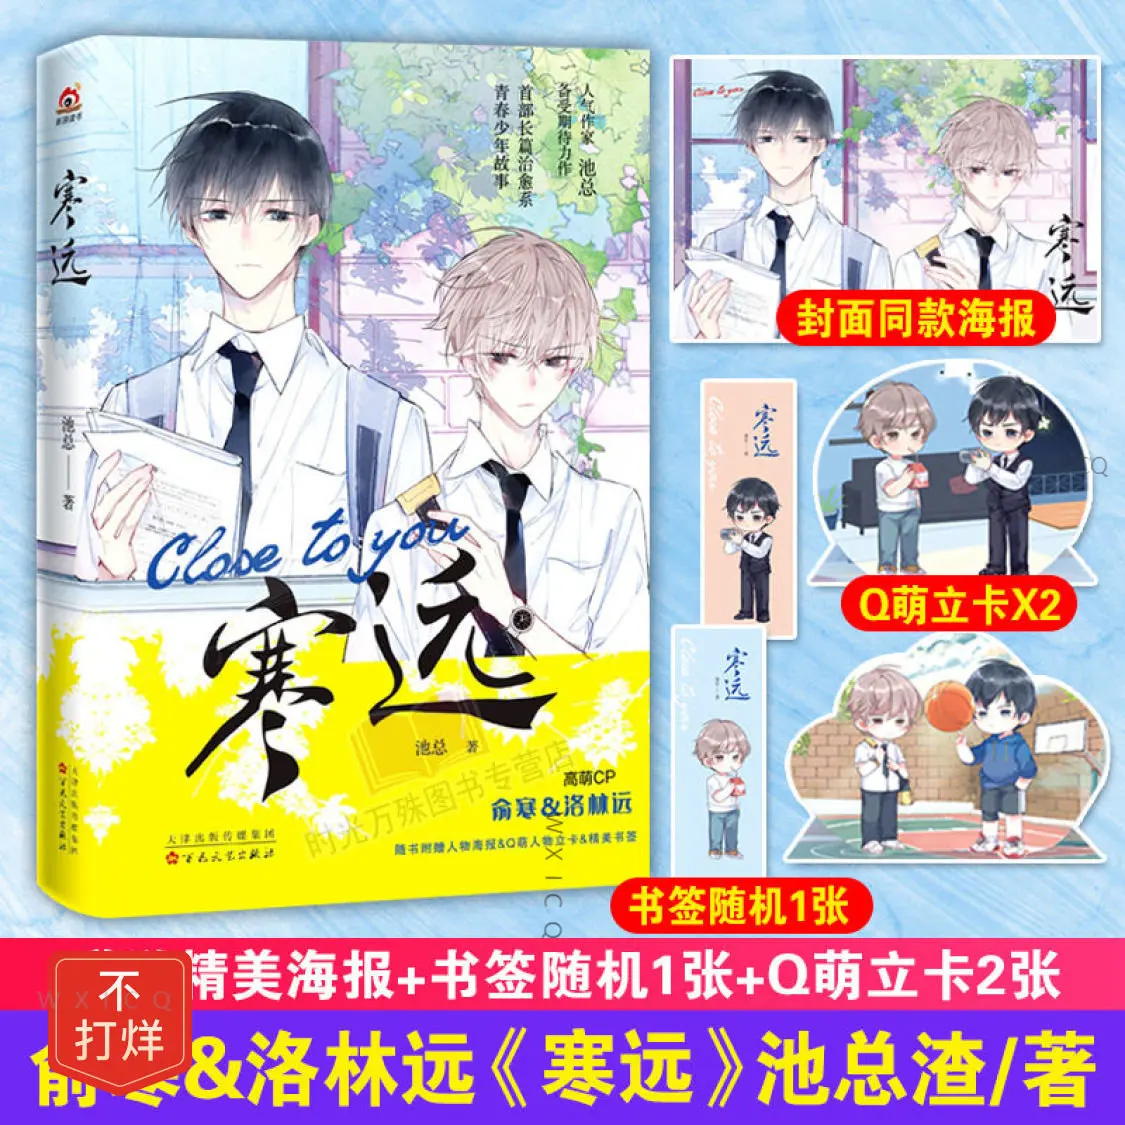 

Campus Romance Love Fiction Books Chinese Novel Yuan Han Luo LinYuan Youth Boy Story Book love graphic novel Libros Art